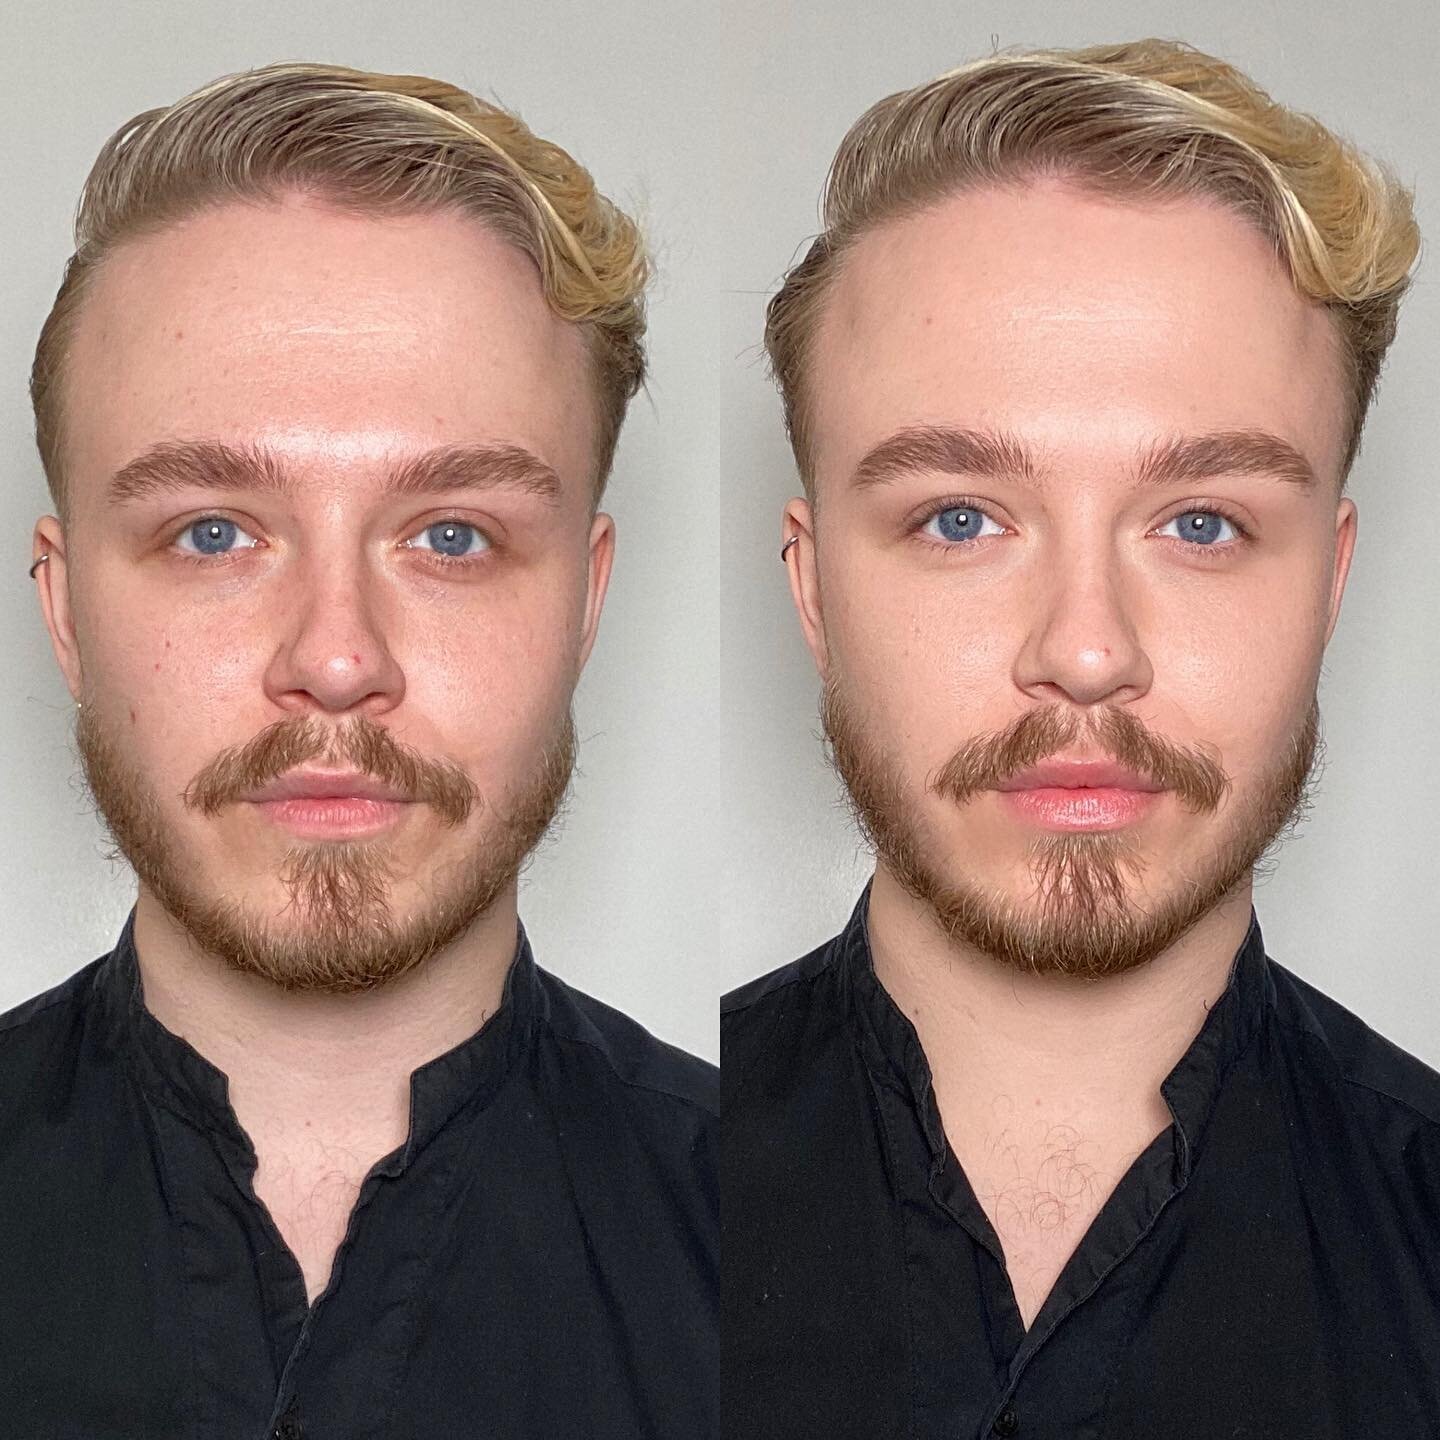 Male grooming @ctilburymakeup for the beautiful @edmellormakeup ✨ 
The magic of skincare and the &ldquo;No Make Up, Make Up&rdquo; look! Who would like to see a tutorial for this? 💕 #charlottetilbury #nomakeupmakeup #malegrooming #groommakeup #natur